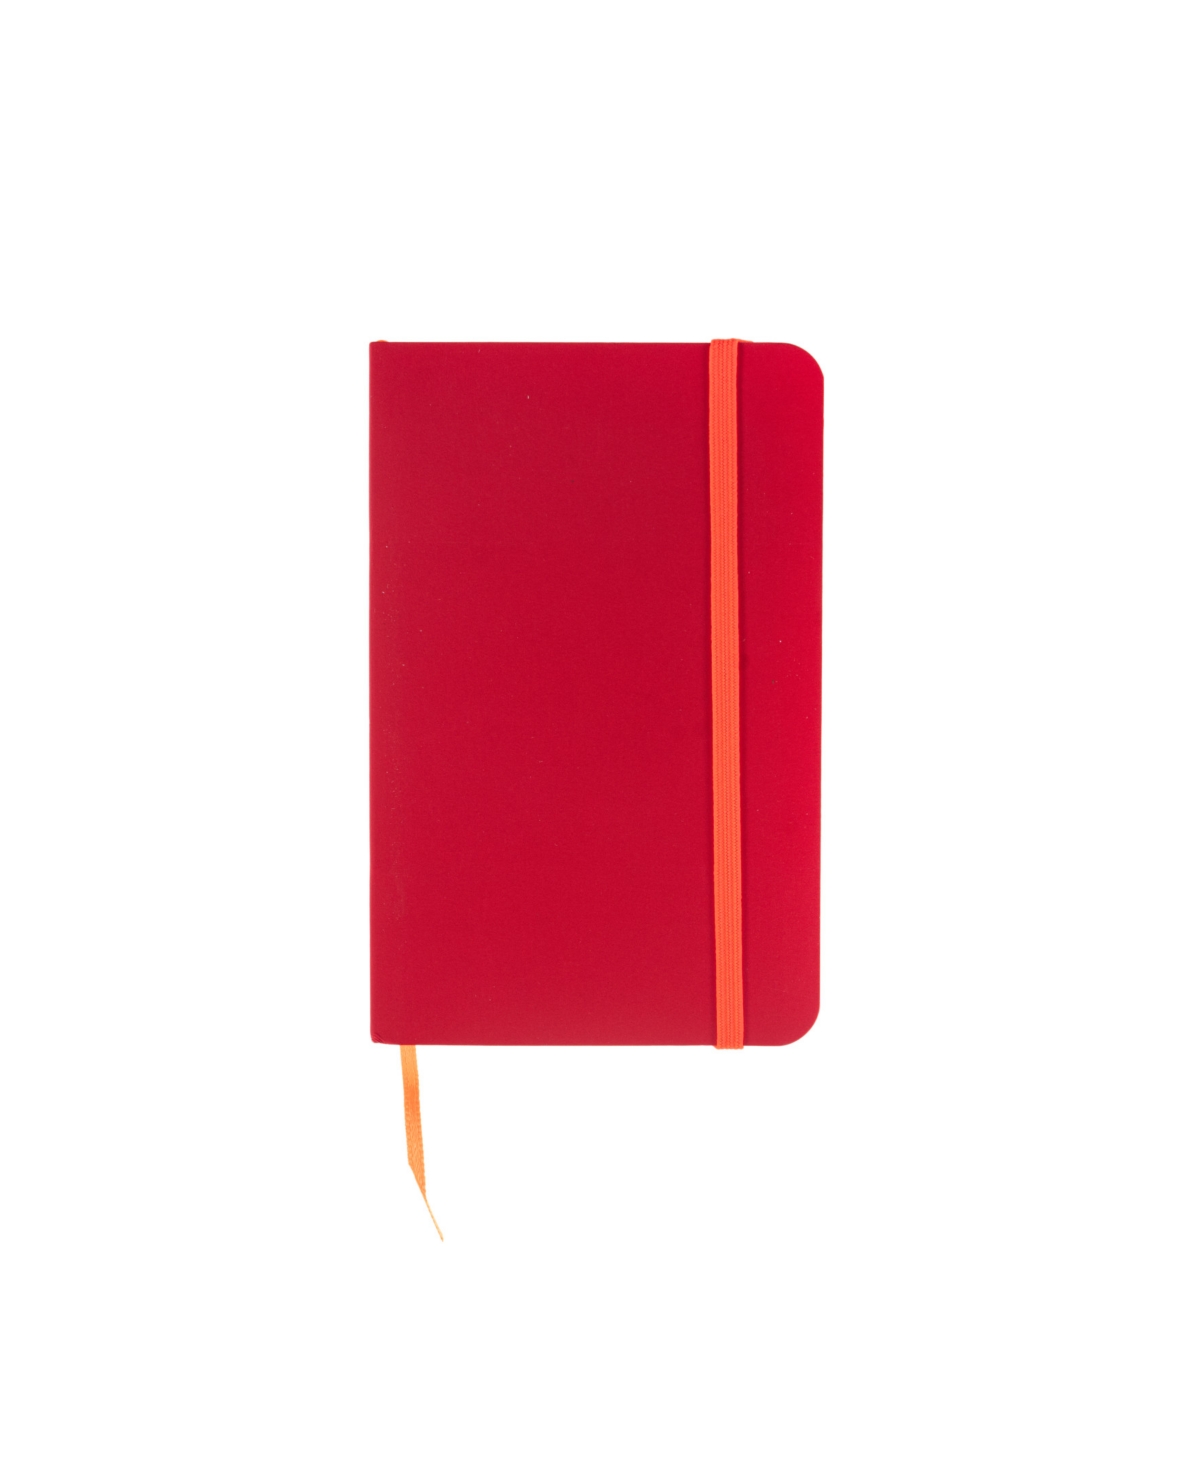 Ispira Soft Cover Dotted Notebook, 3.5" x 5.5" - Red